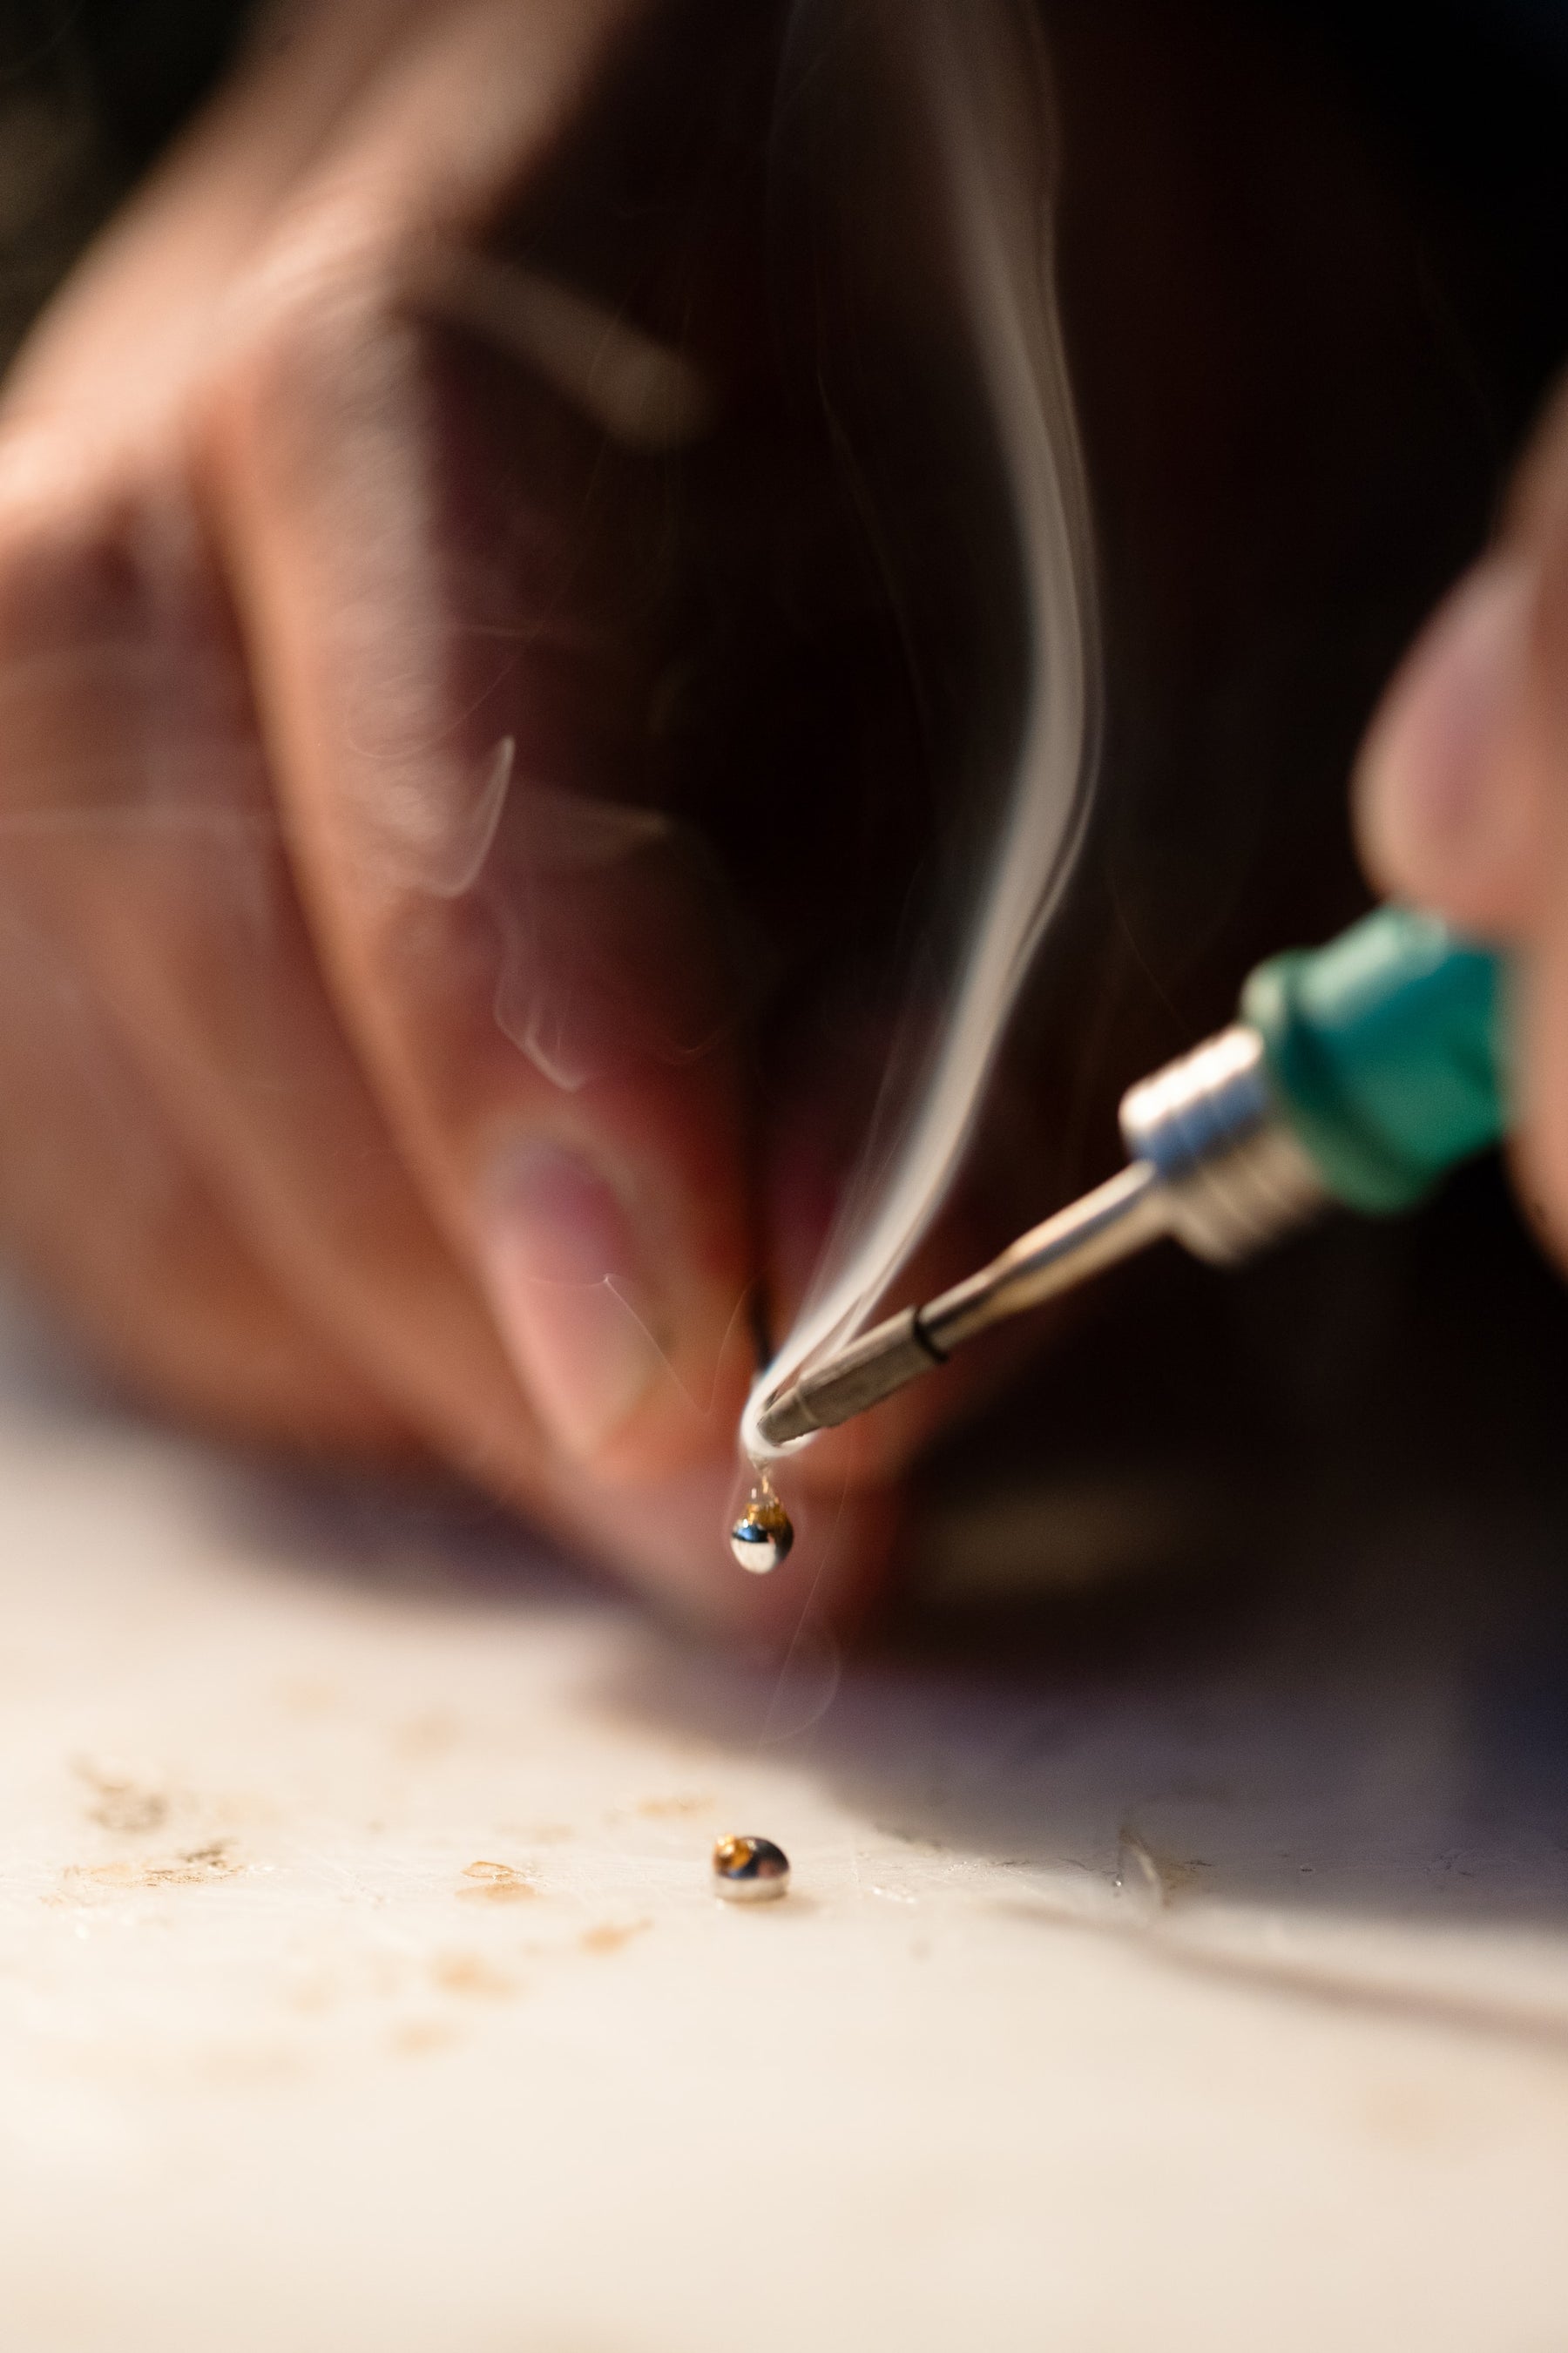 Image of a person soldering